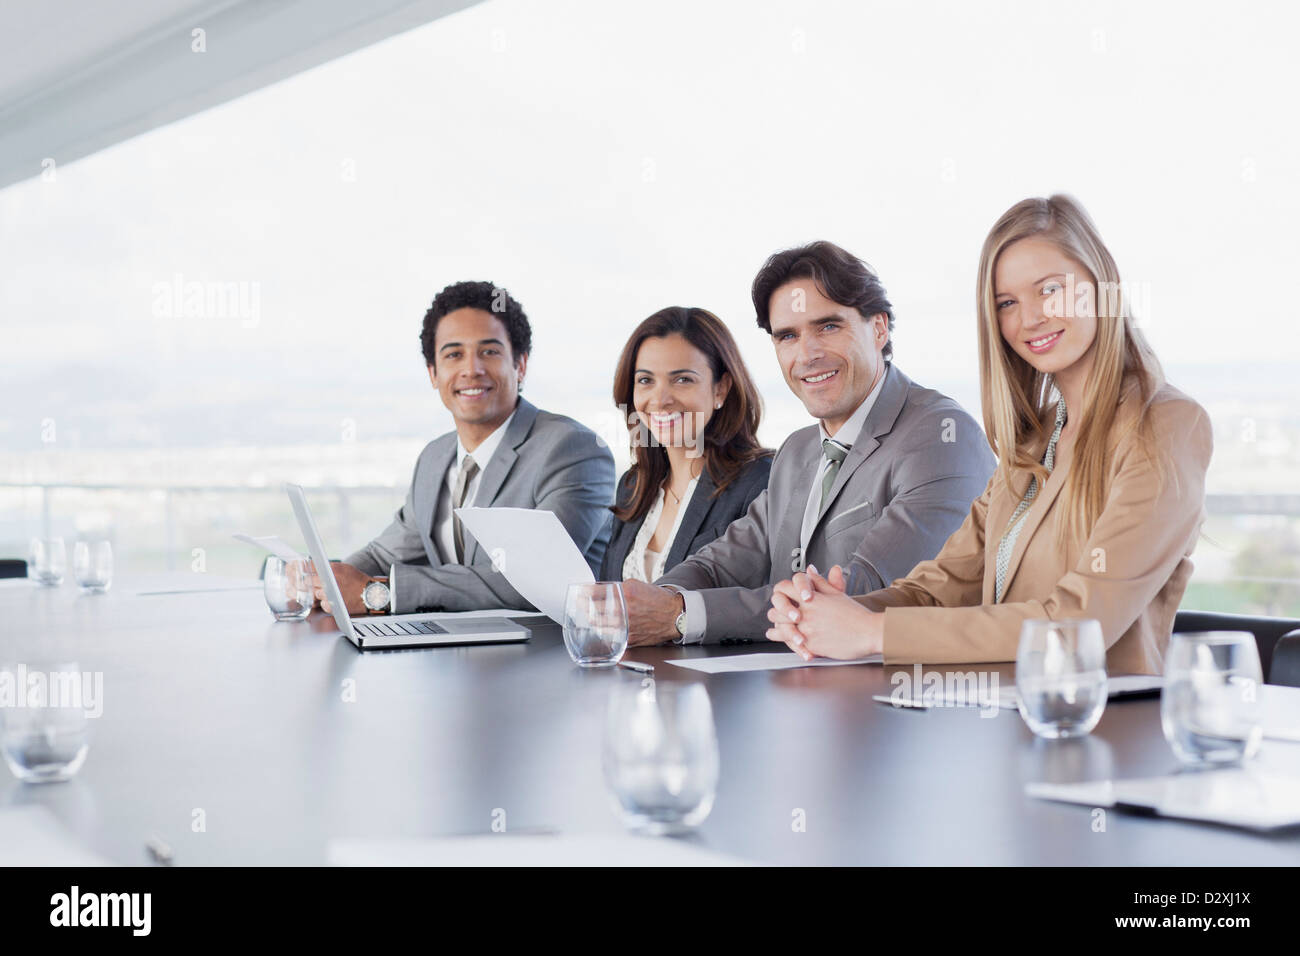 Portrait of smiling business people sitting in a row in conference room Stock Photo